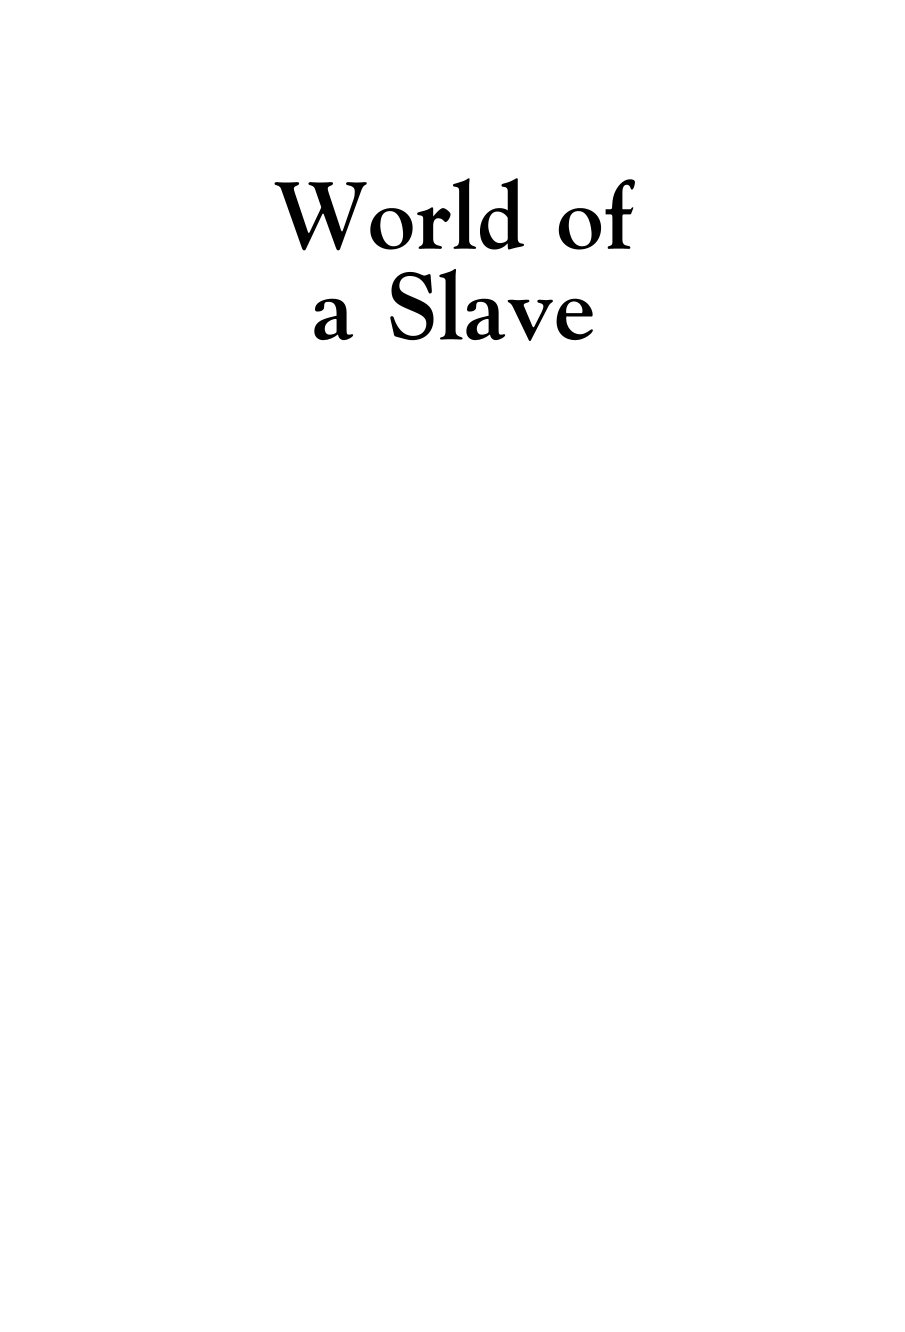 World of a Slave: Encyclopedia of the Material Life of Slaves in the United States [2 volumes] page Vol1:i